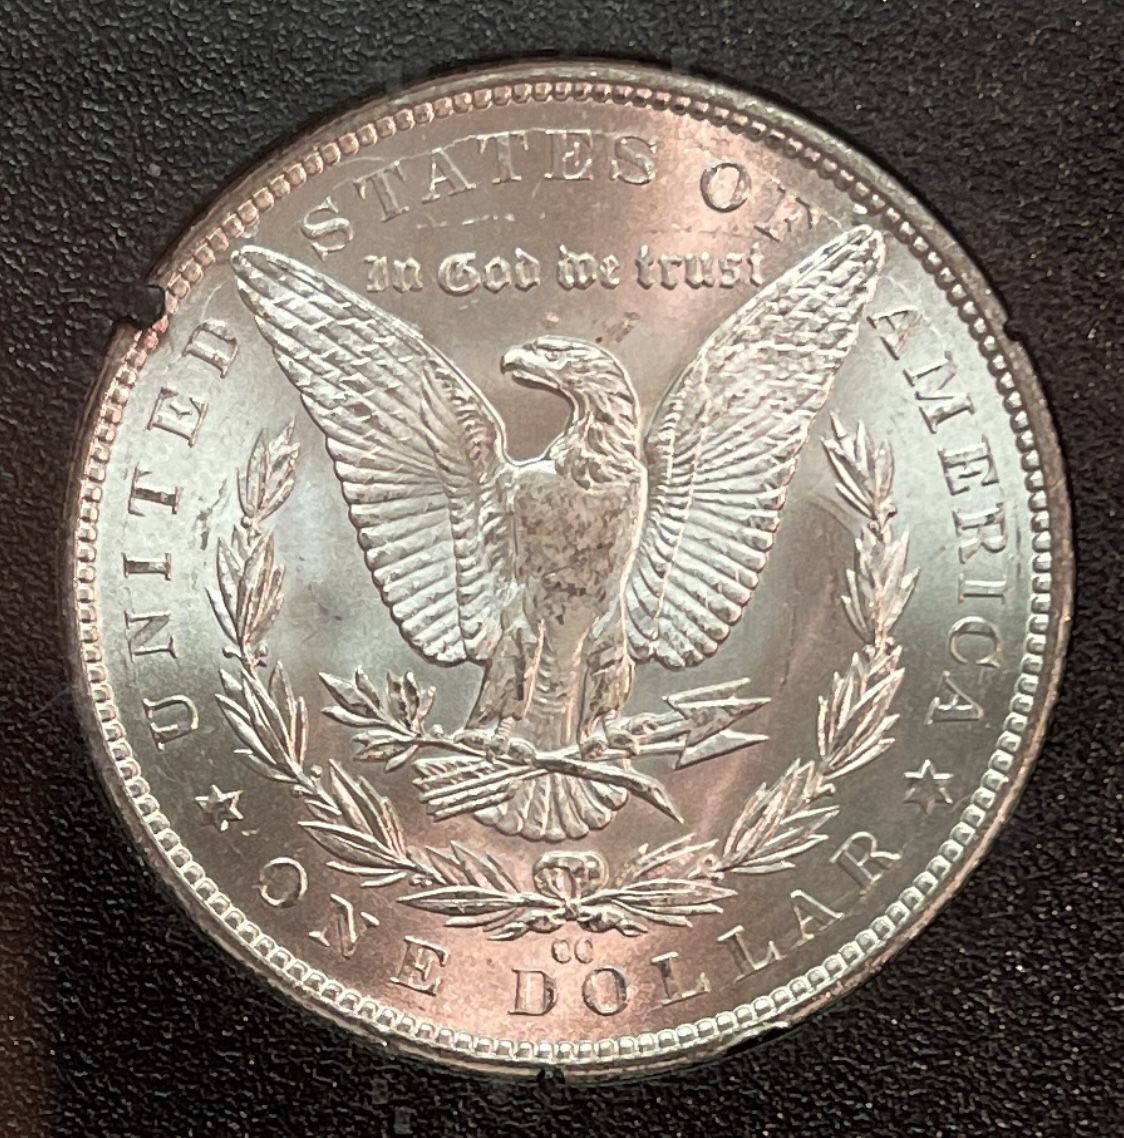 Rare Carson City 1883 cc Morgan Silver Dollar with error..  lines and Starbursts on Tip of the Eagle’s Wings as shown, See Description For More Info